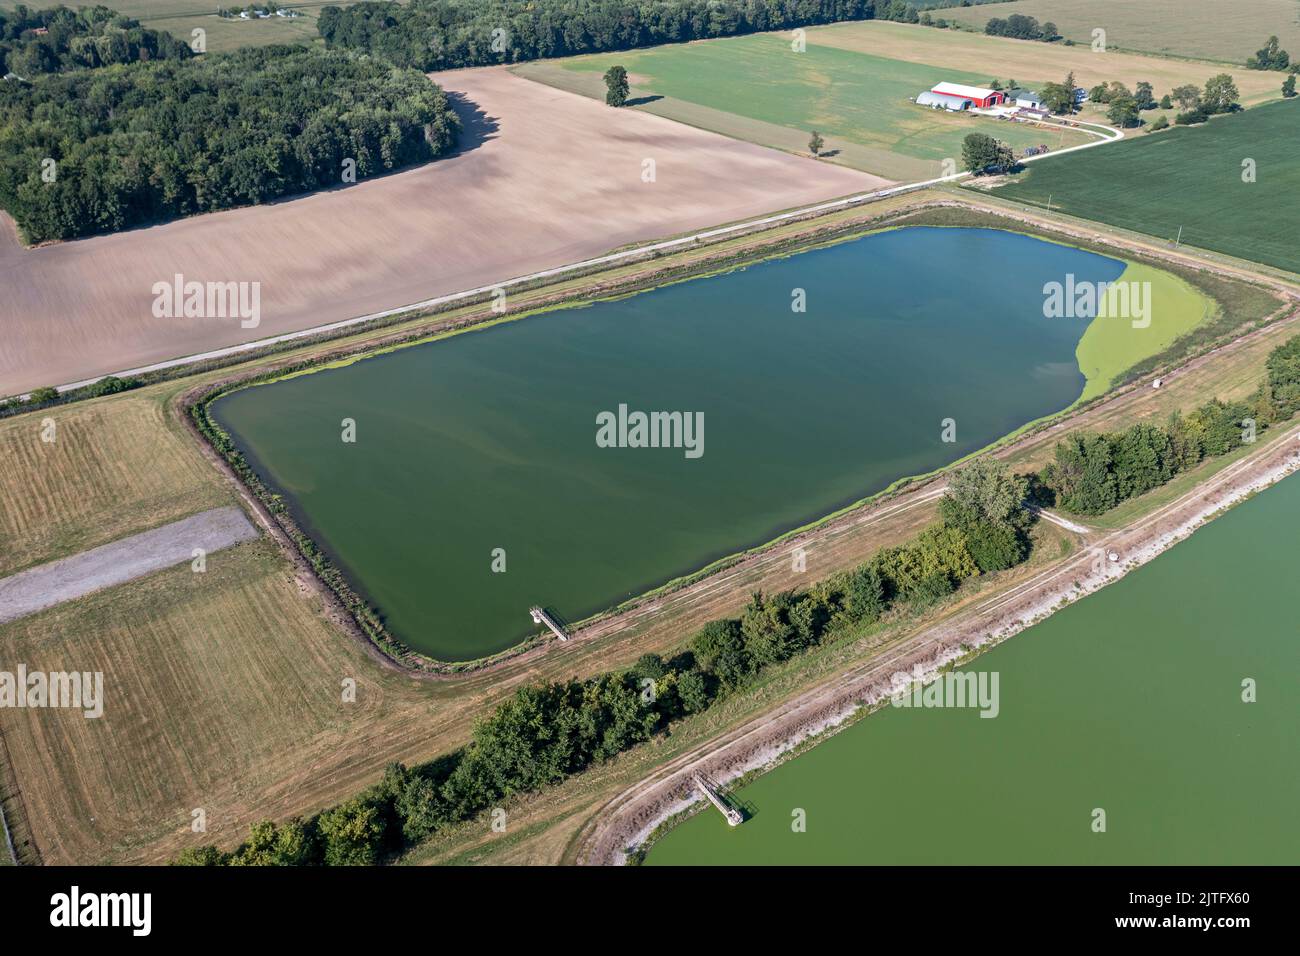 Three Oaks, Michigan - Wastewater stabilization lagoons for the village of Three Oaks. The lagoons treat wastewater as bacteria react with organic mat Stock Photo